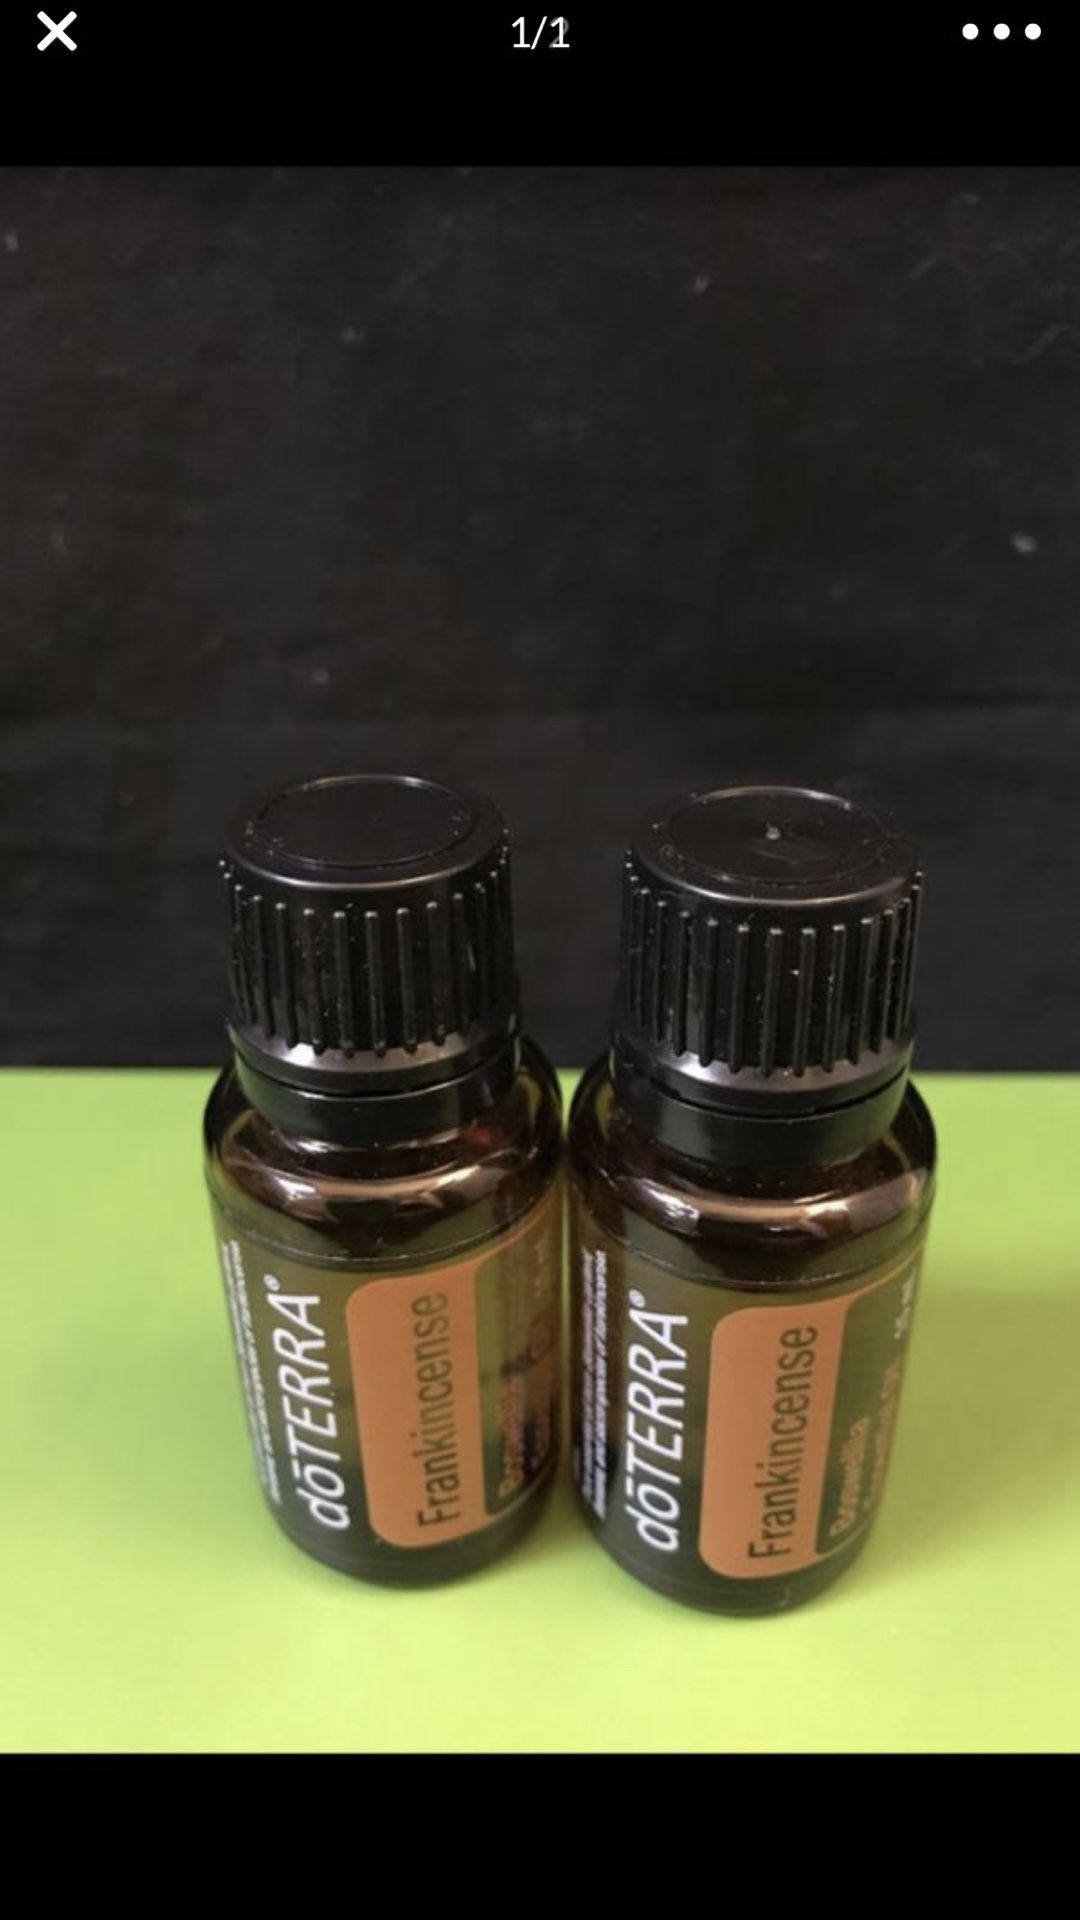 New/Sealed doTerra Frankincense Essential Oil 2 of Set. 15ml.